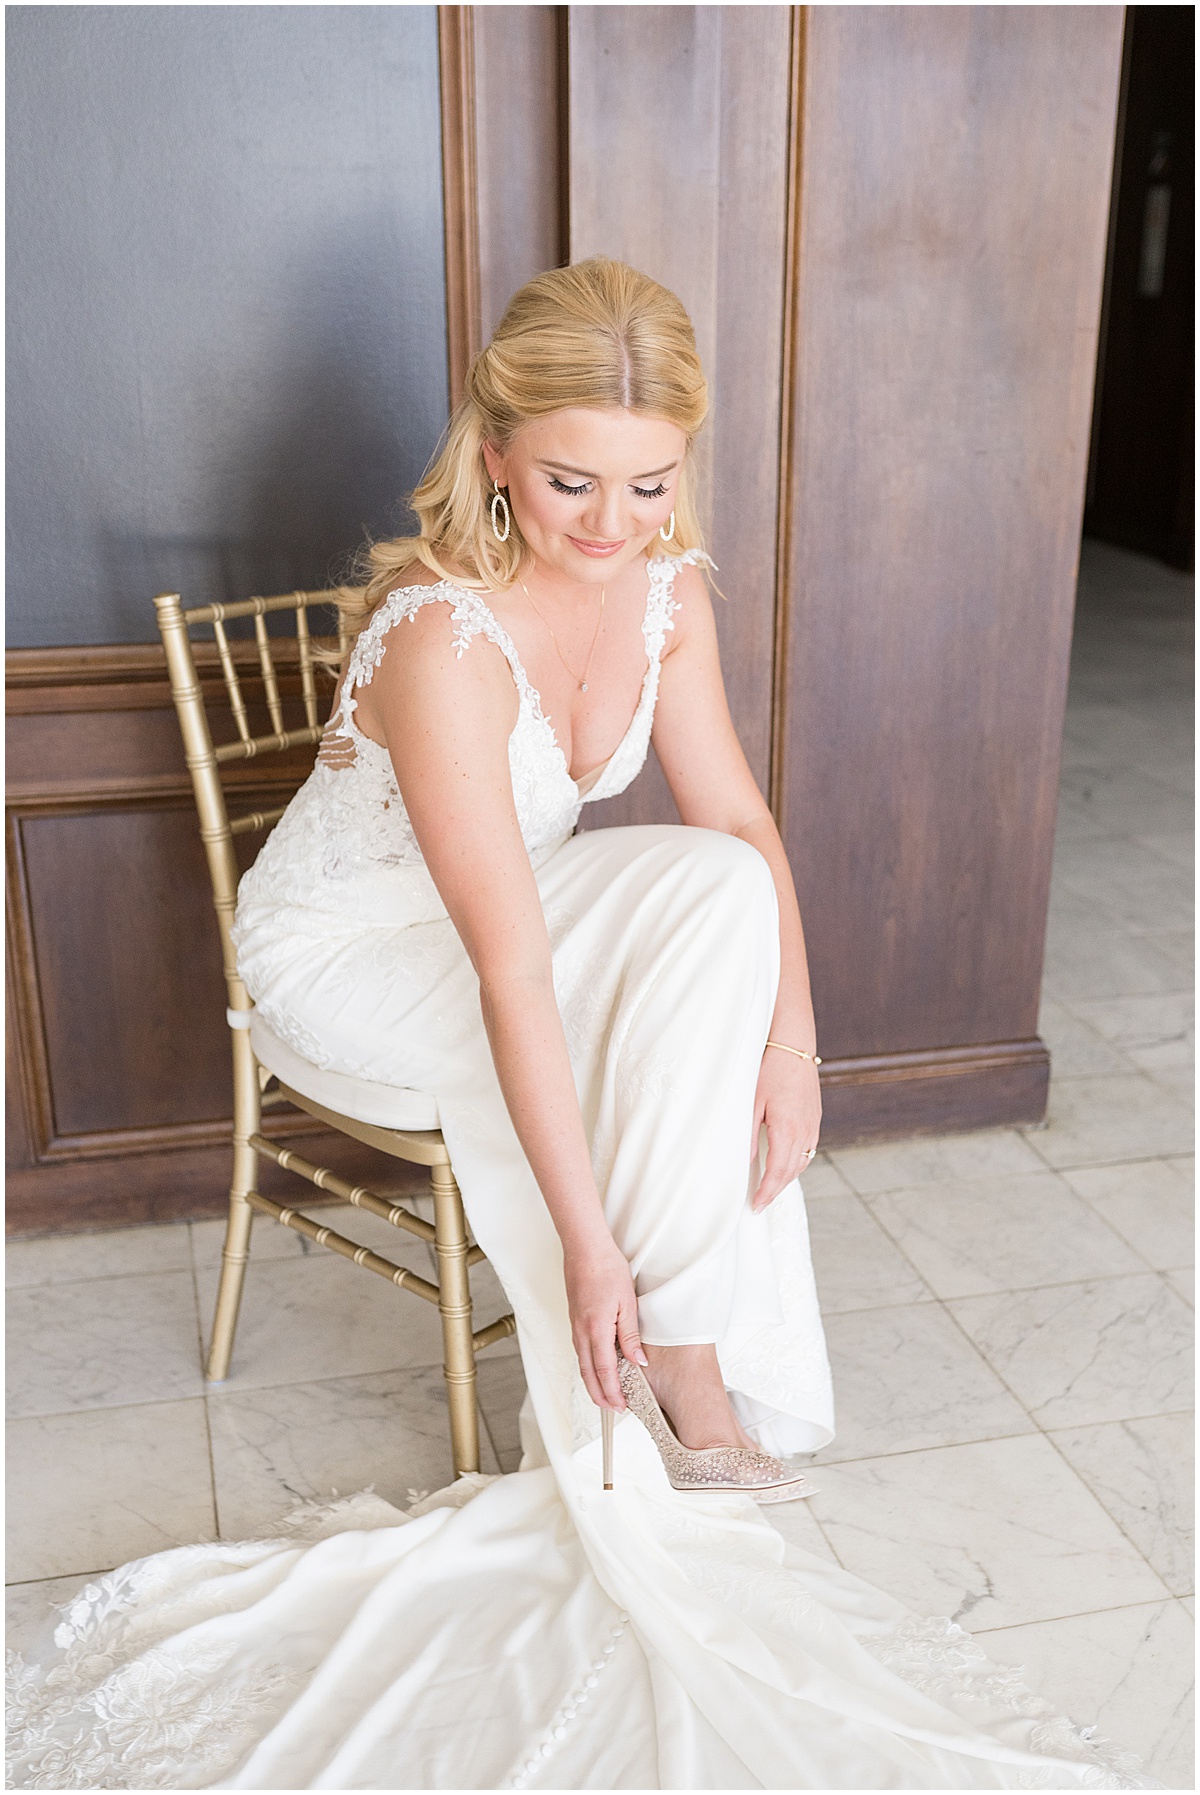 Bride putting on shoes for wedding at JPS Events in downtown Indianapolis.